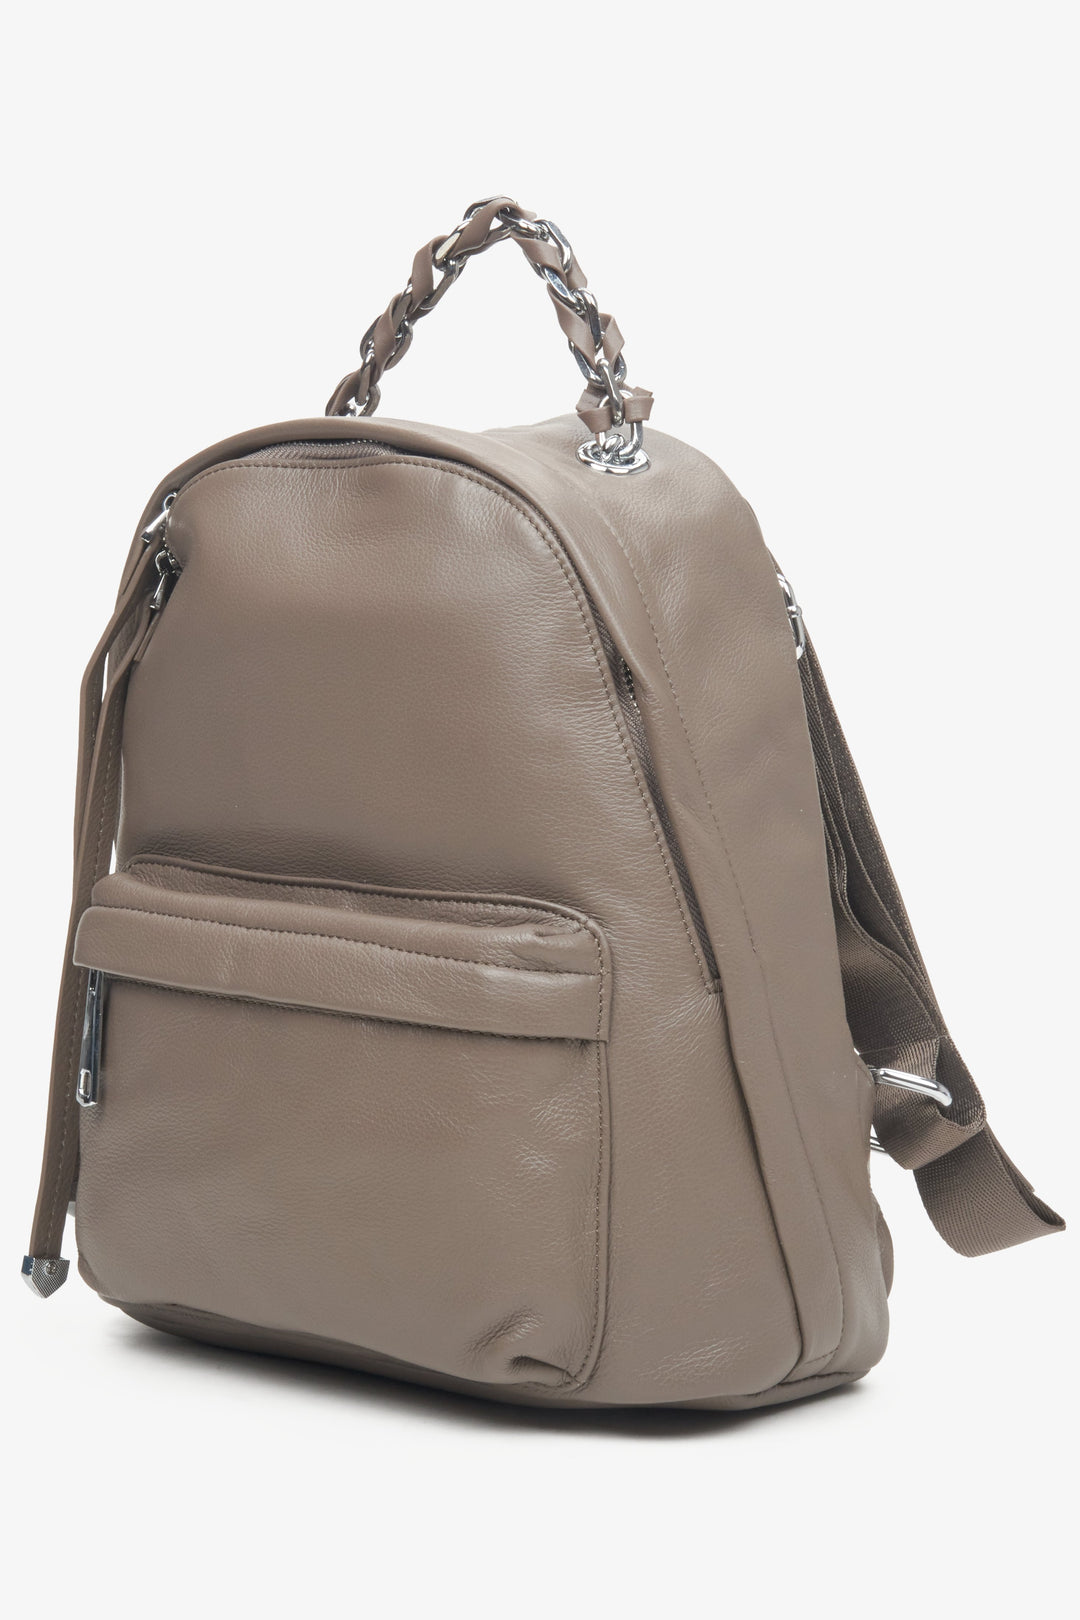 Estro's women's grey and brown leather backpack.